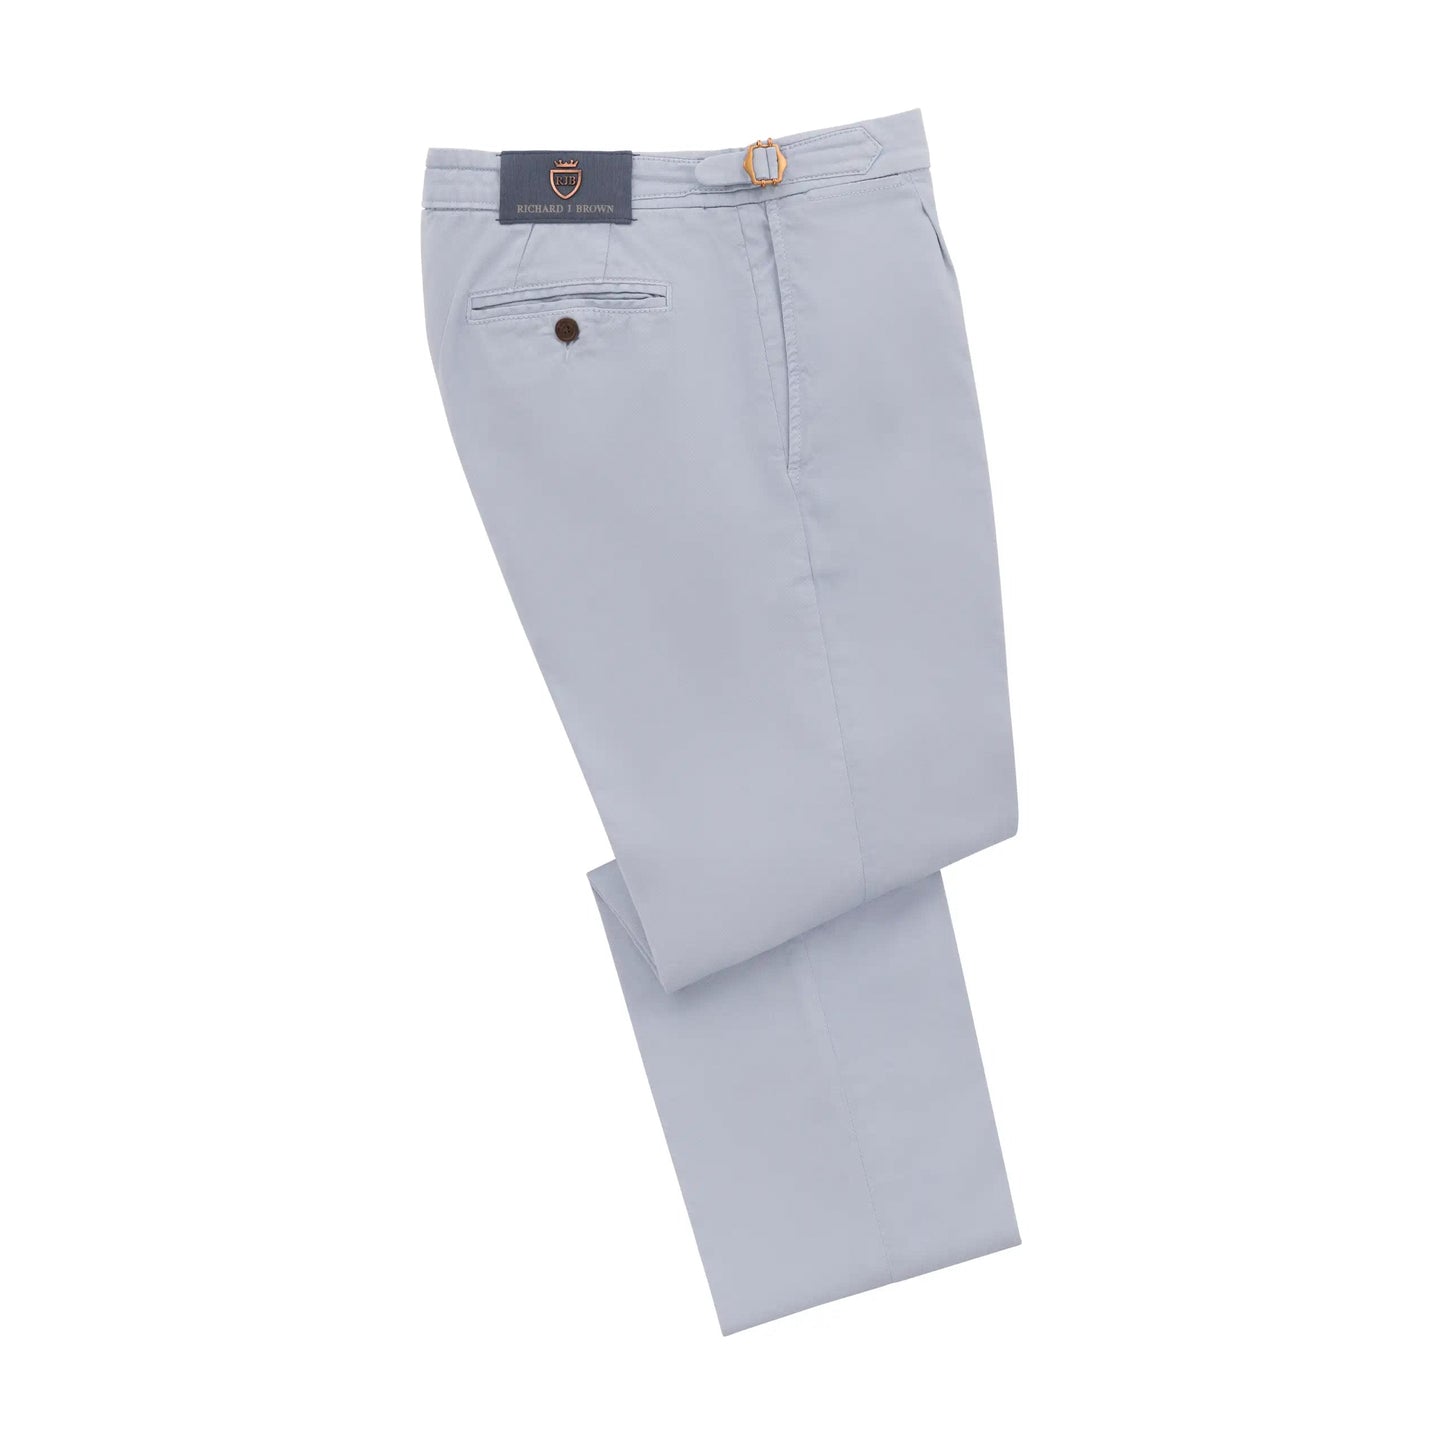 Richard J. Brown Slim - Fit Cotton Pleated Trousers in Light Blue - SARTALE